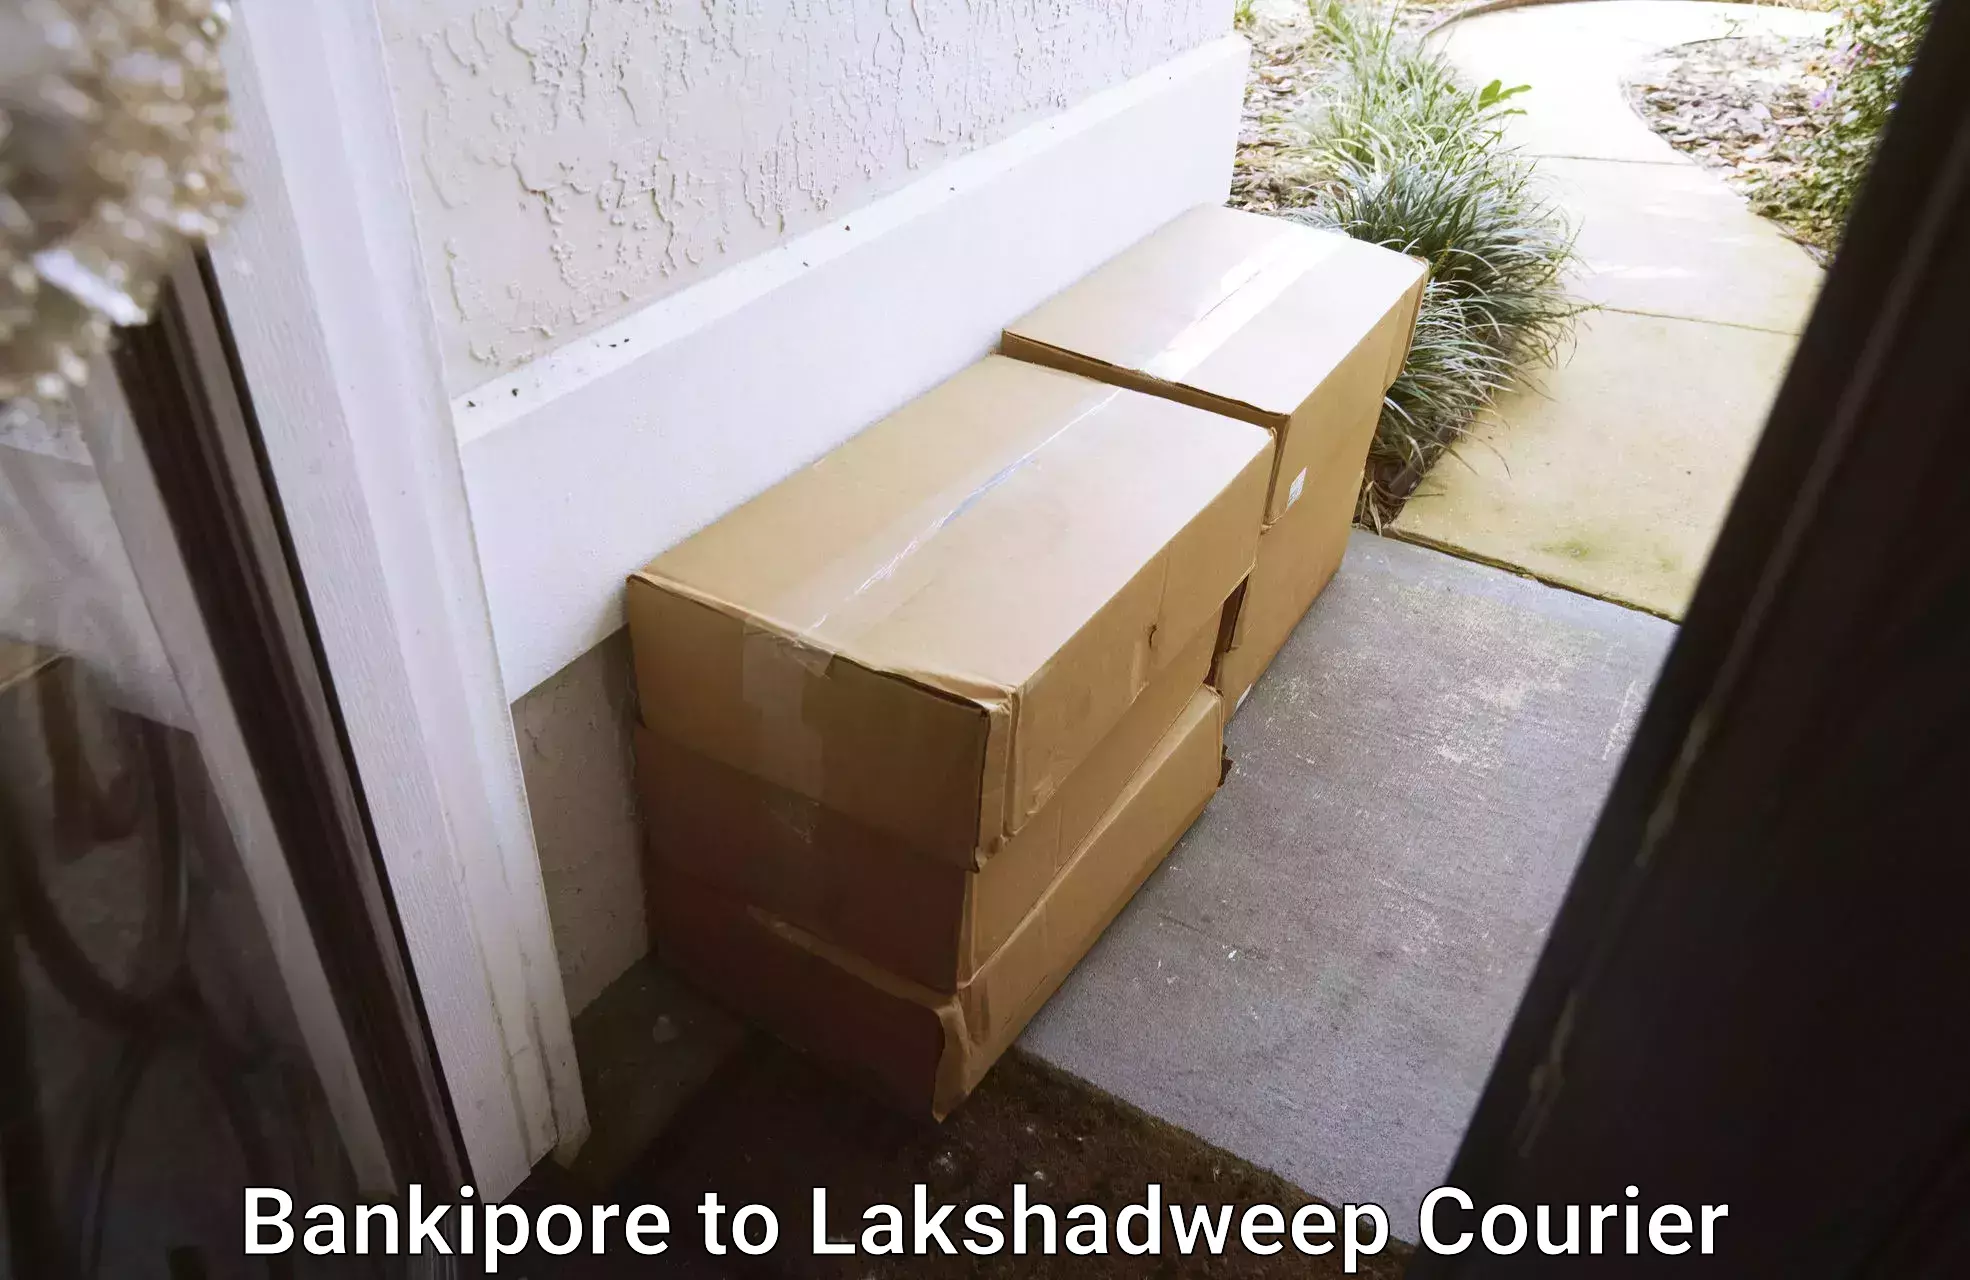 Furniture delivery service Bankipore to Lakshadweep